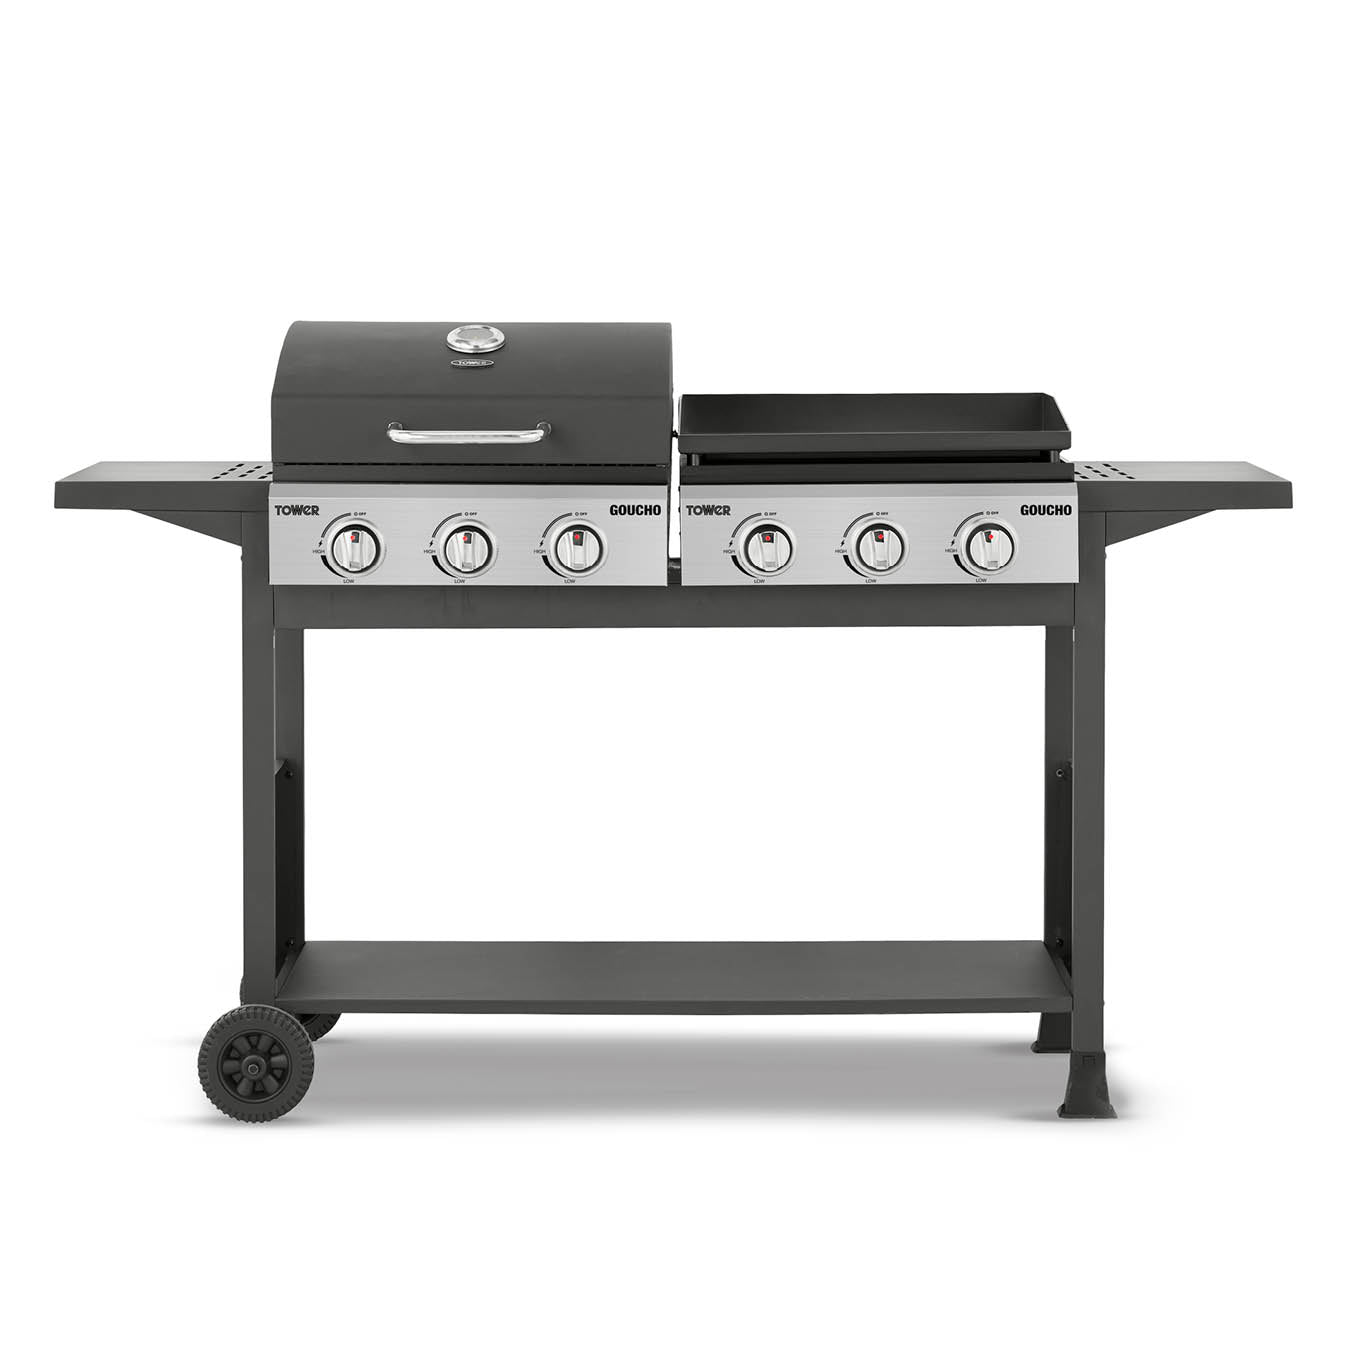 TOWER Goucho Gas BBQ Grill with 5056462327082